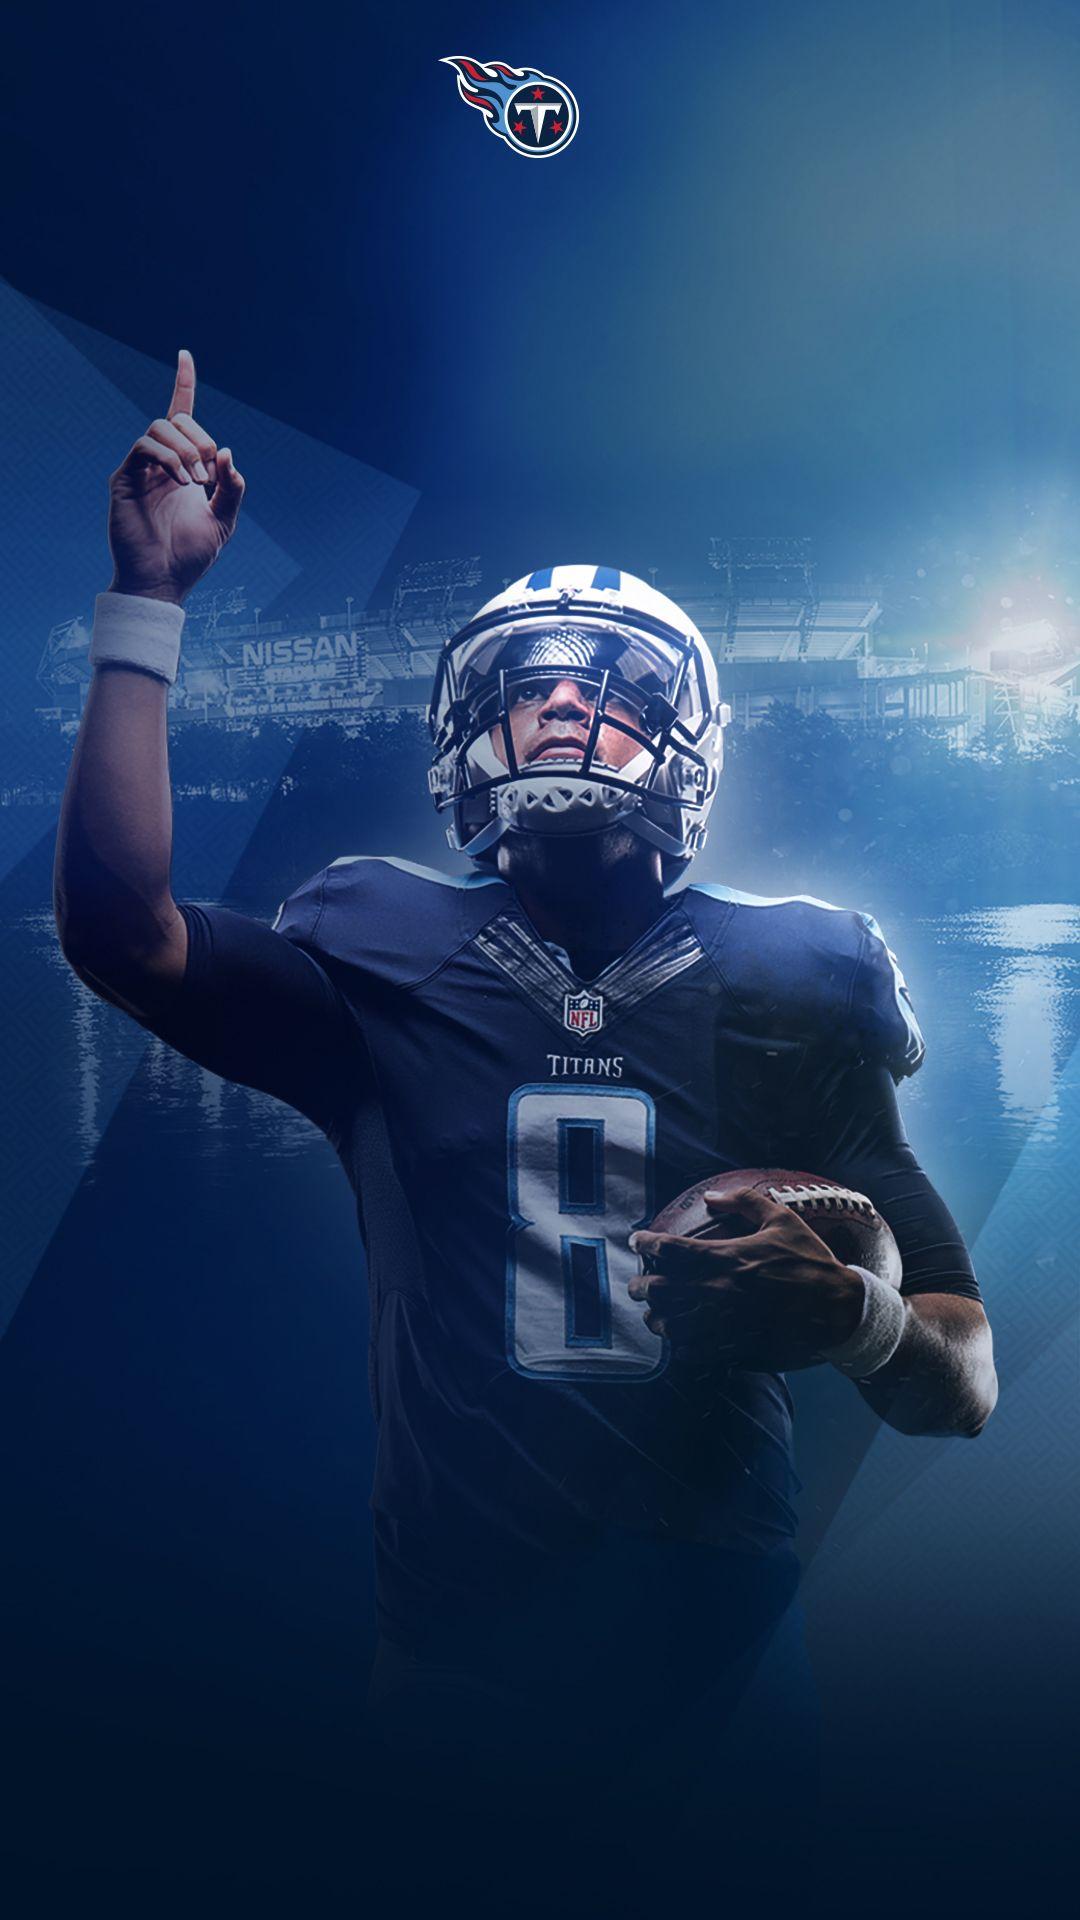 Tennessee Titans on Twitter Fresh wallpapers for your phone   WallpaperWednesday httpstcoo34WpsbPoh  Twitter